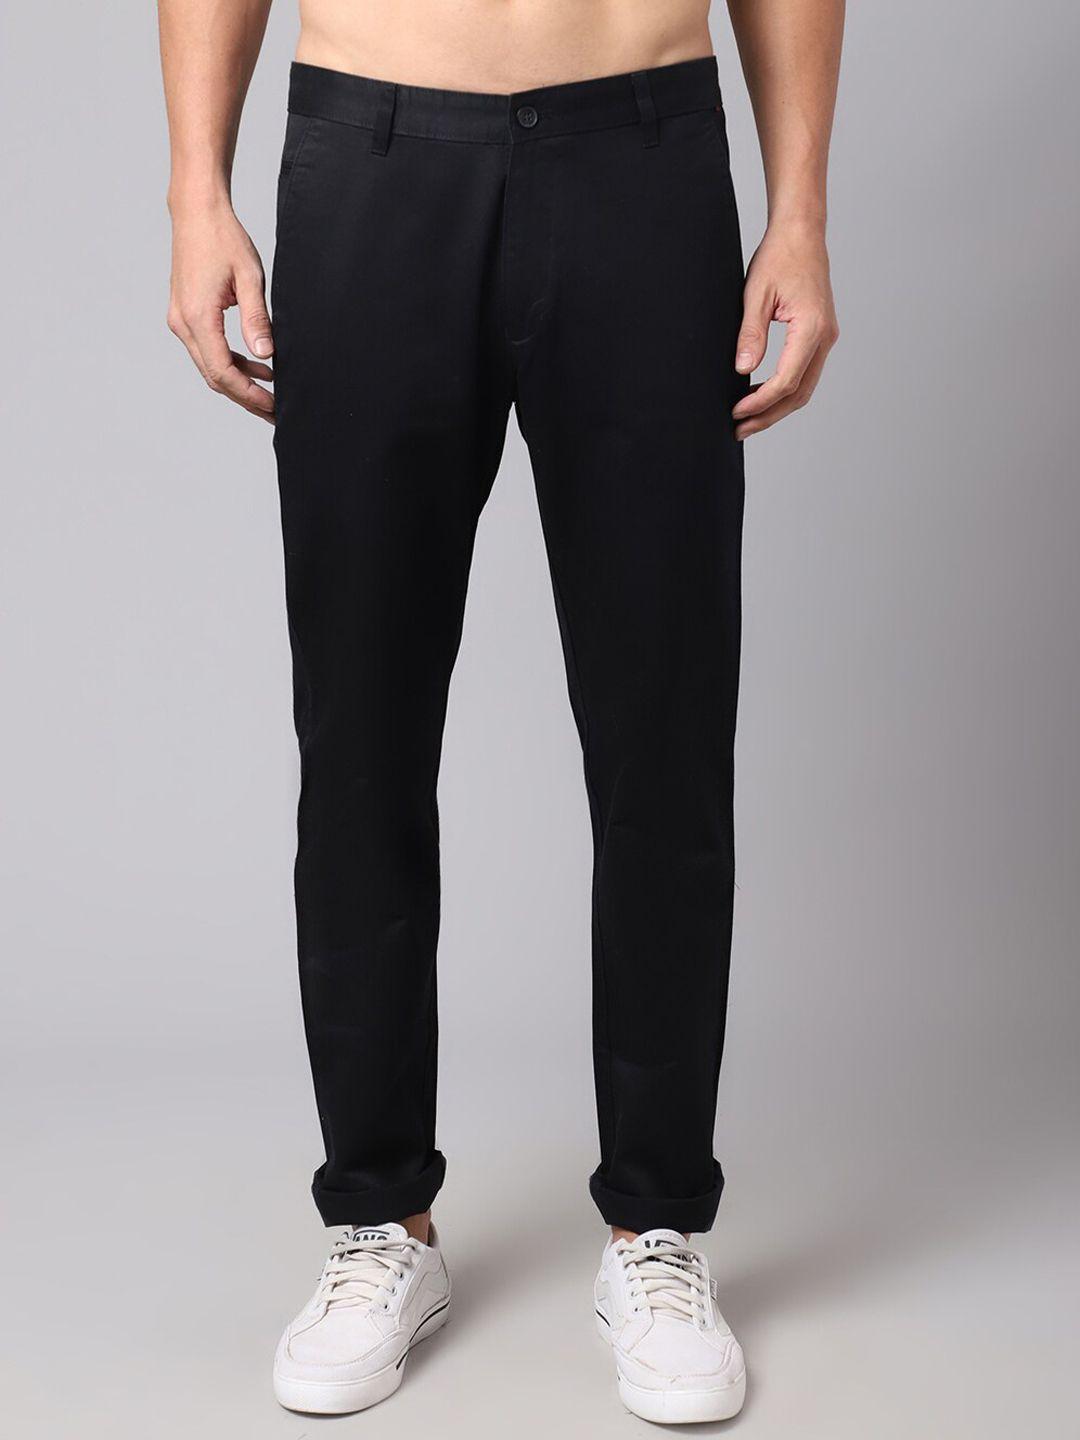 cantabil-men-black-chinos-cotton-trousers